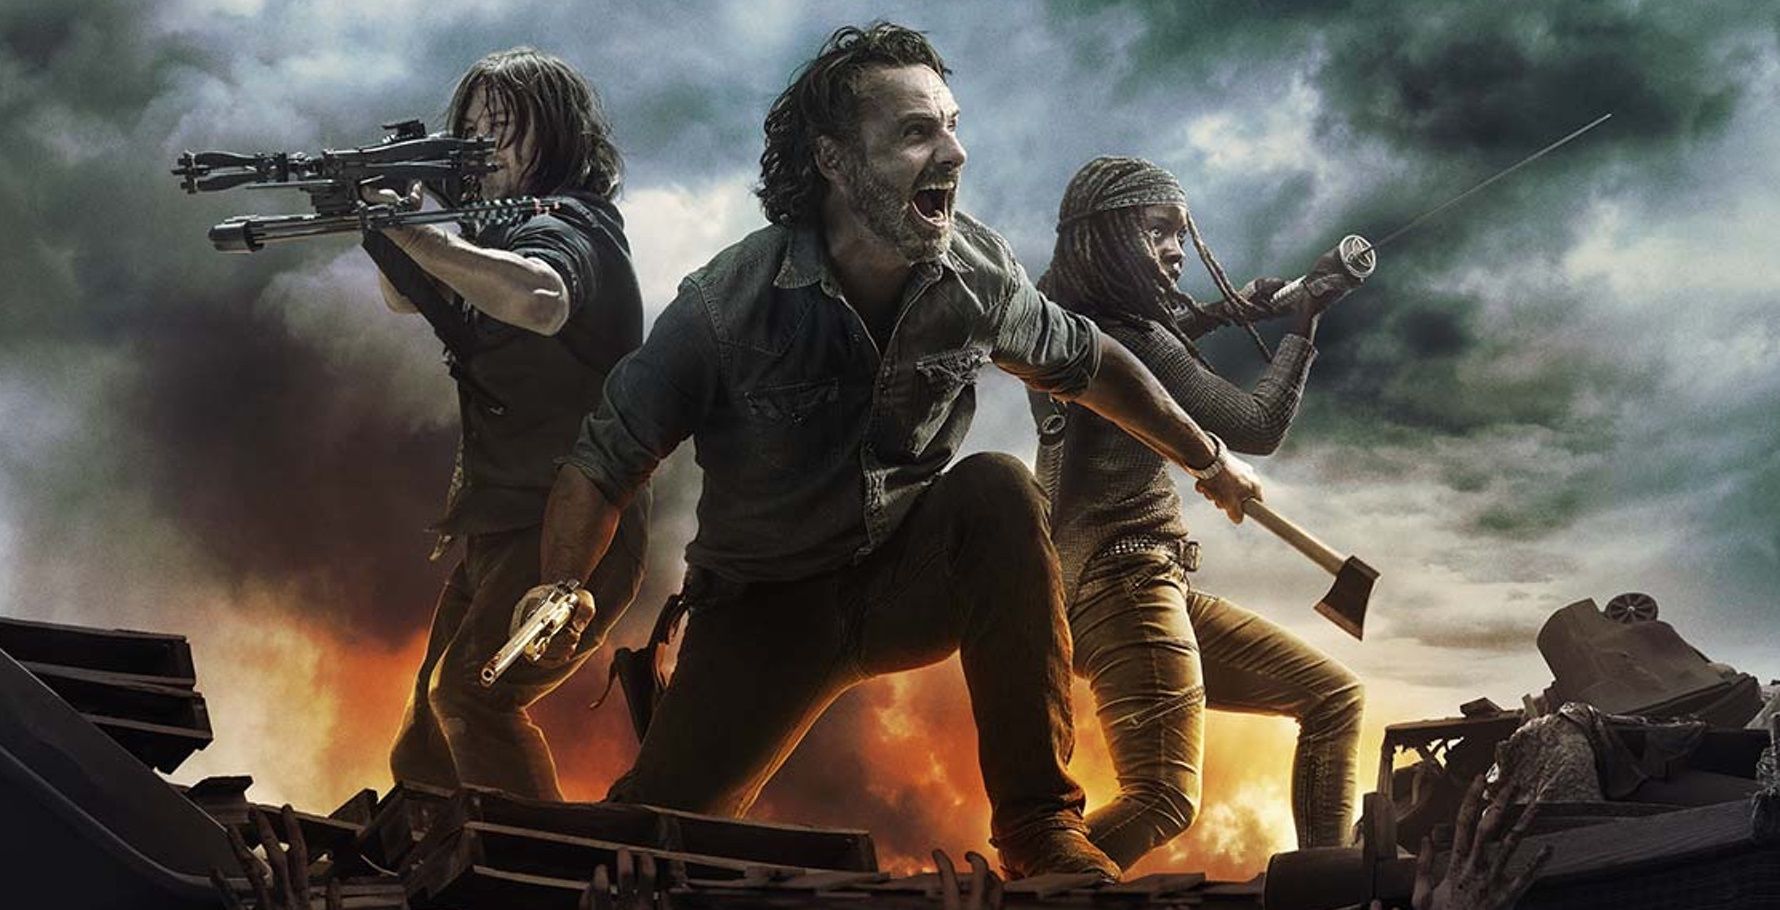 Ranked The Longest Surviving Characters On The Walking Dead